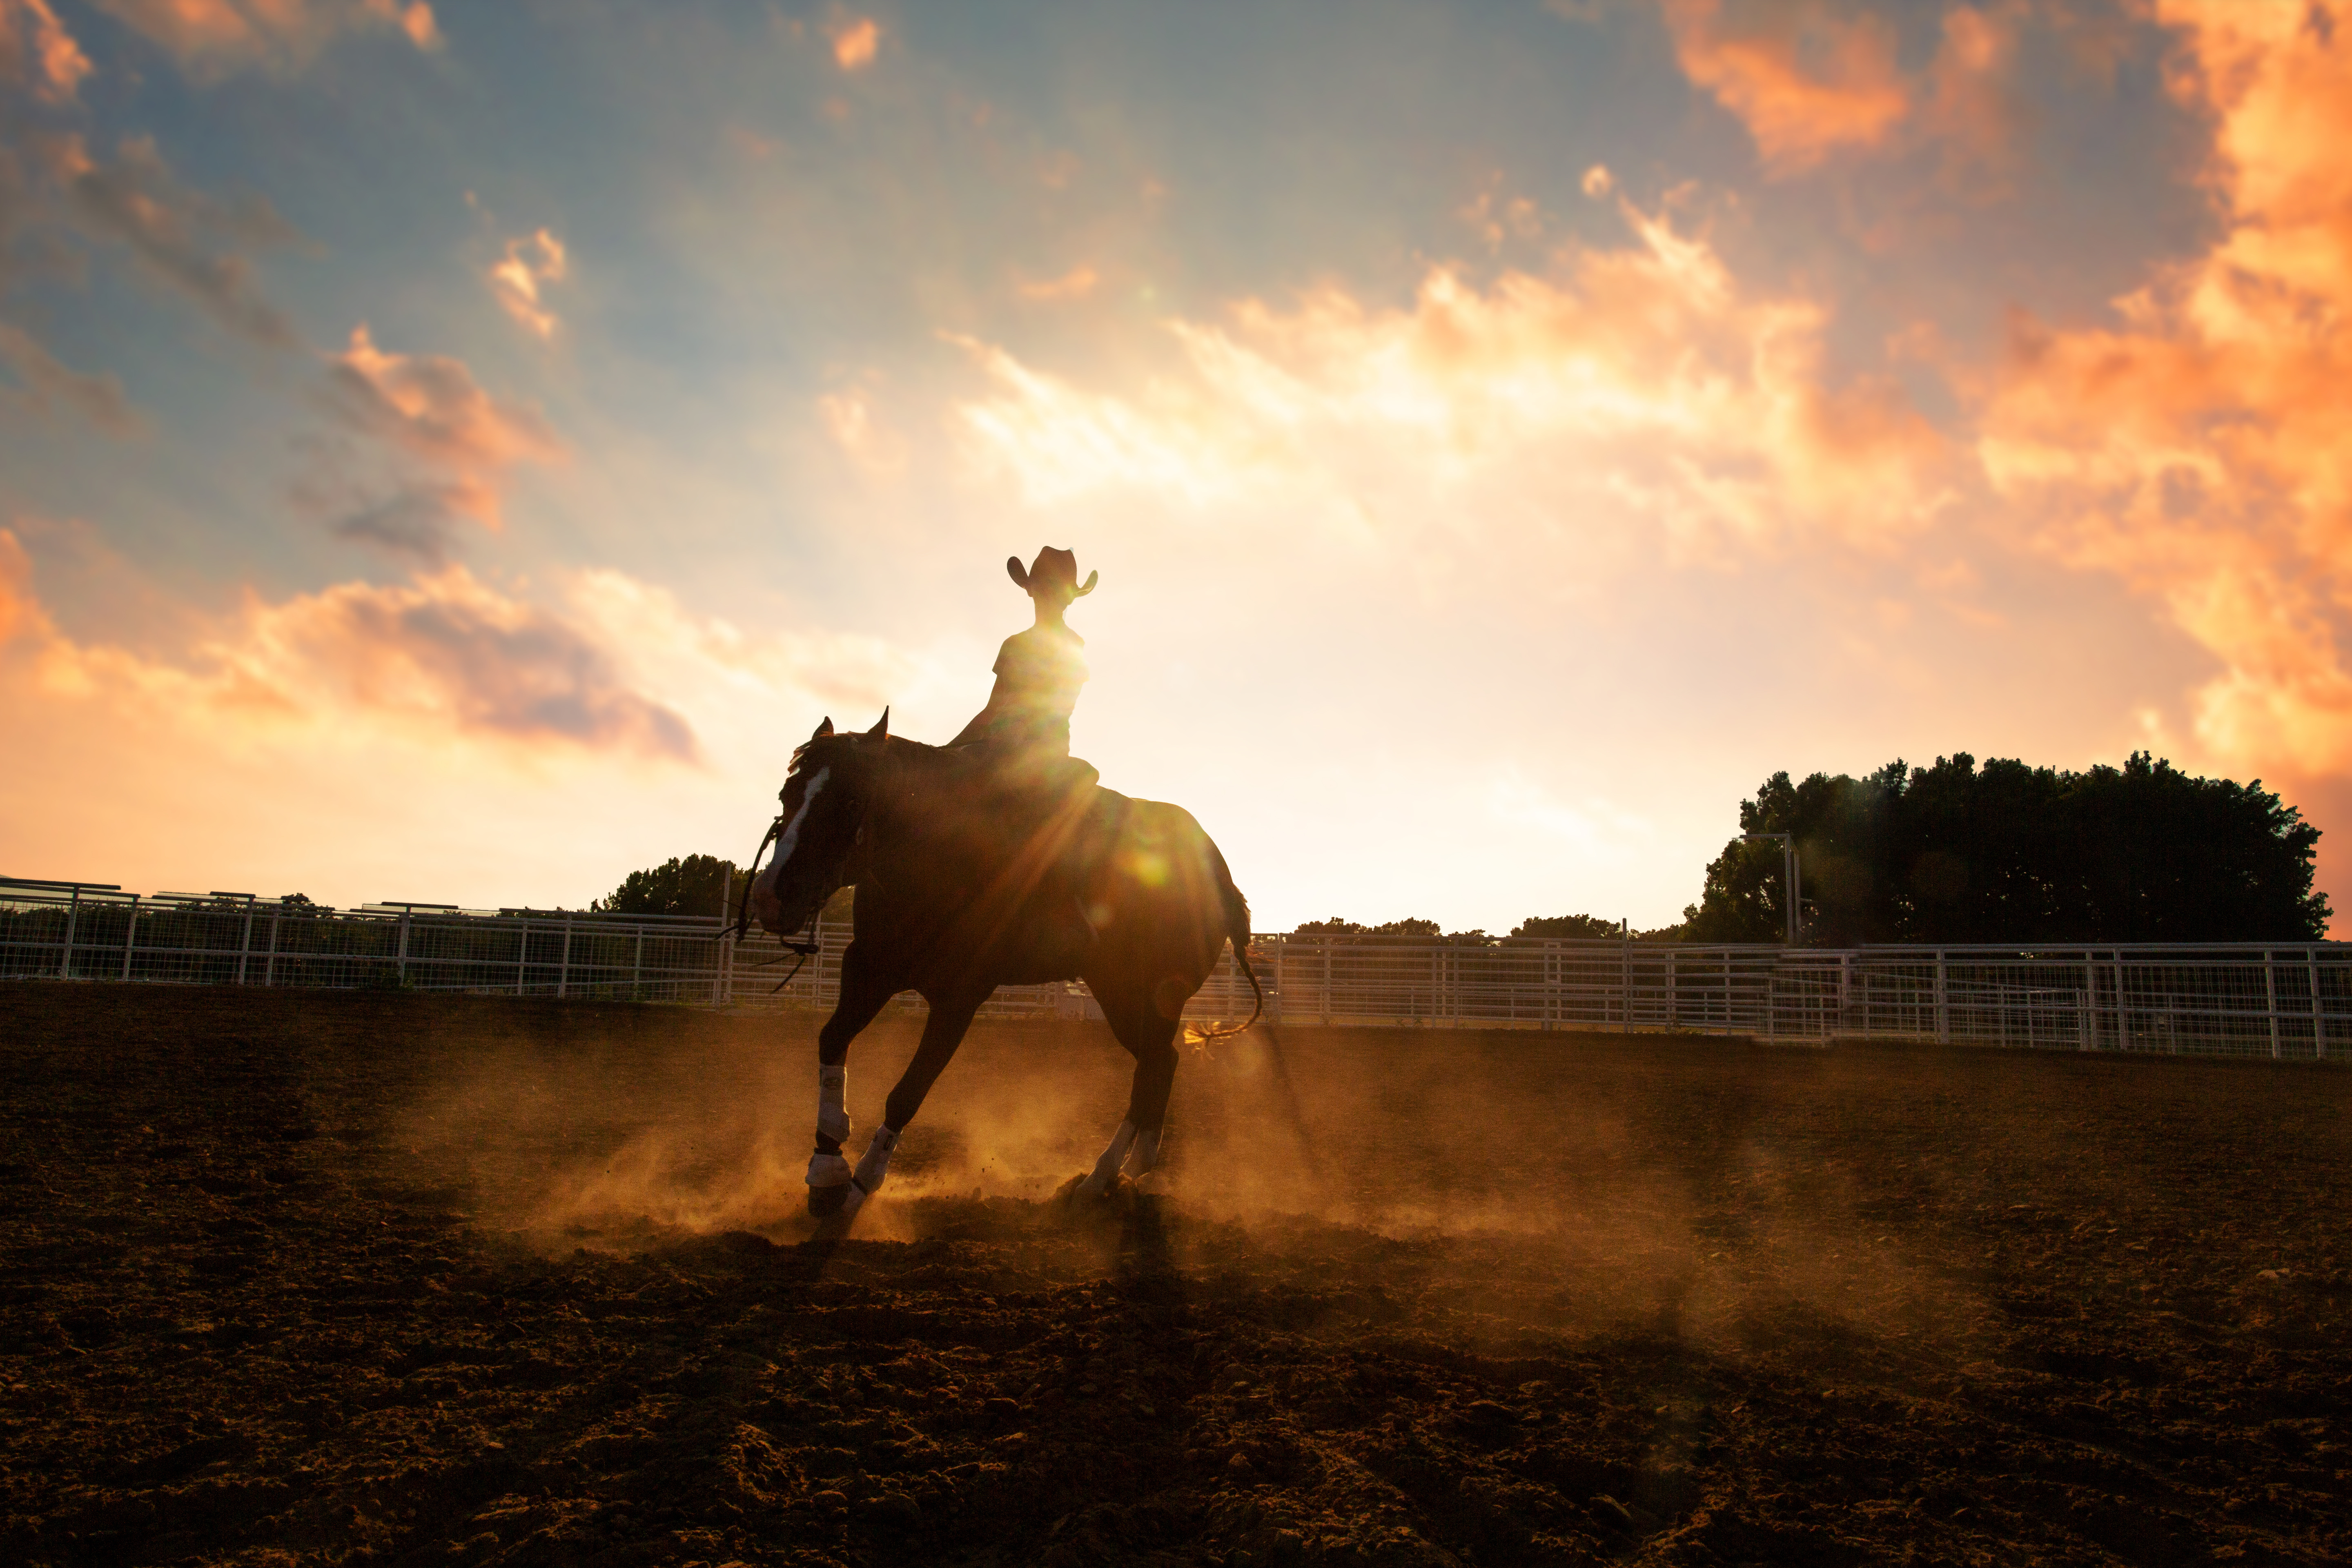 A woman riding western with a dramatic sunrise sky behind her